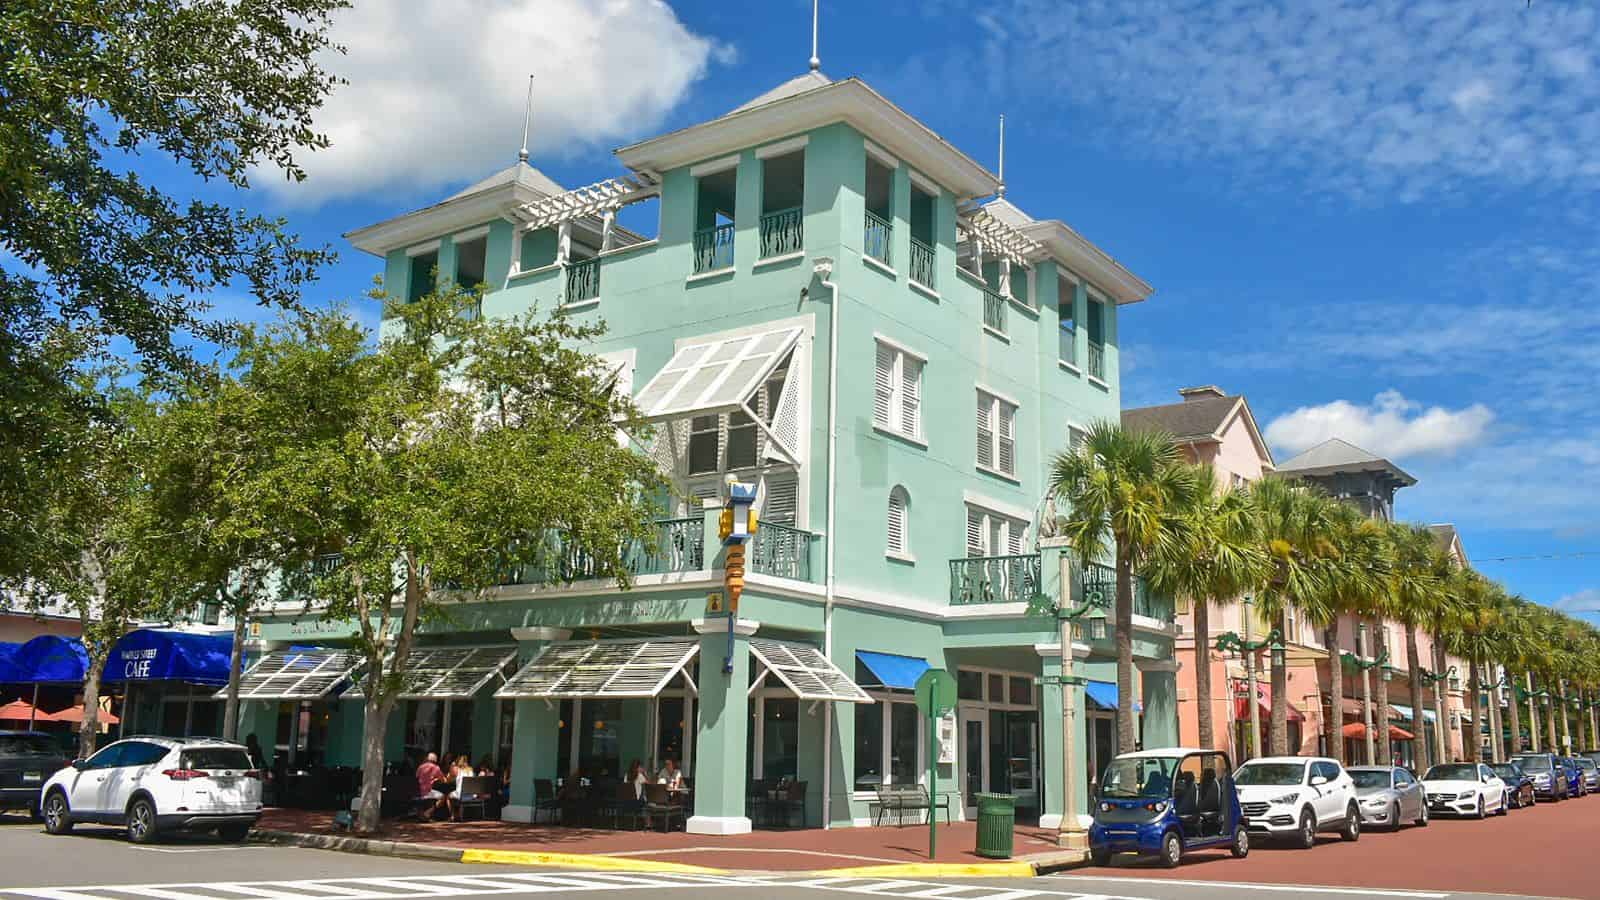 <p>With a name like Celebration, you may not be surprised that this Floridian town was developed by Walt Disney. A charming town of beautiful architecture and waterfront views, <a href="https://www.forbes.com/sites/johngiuffo/2011/09/22/americas-prettiest-neighborhoods/?sh=100b94bd6c30">Forbes</a> named it one of the prettiest neighborhoods in America. If that’s not enough, Celebration also hosts some of the country’s best Cuban restaurants.</p>